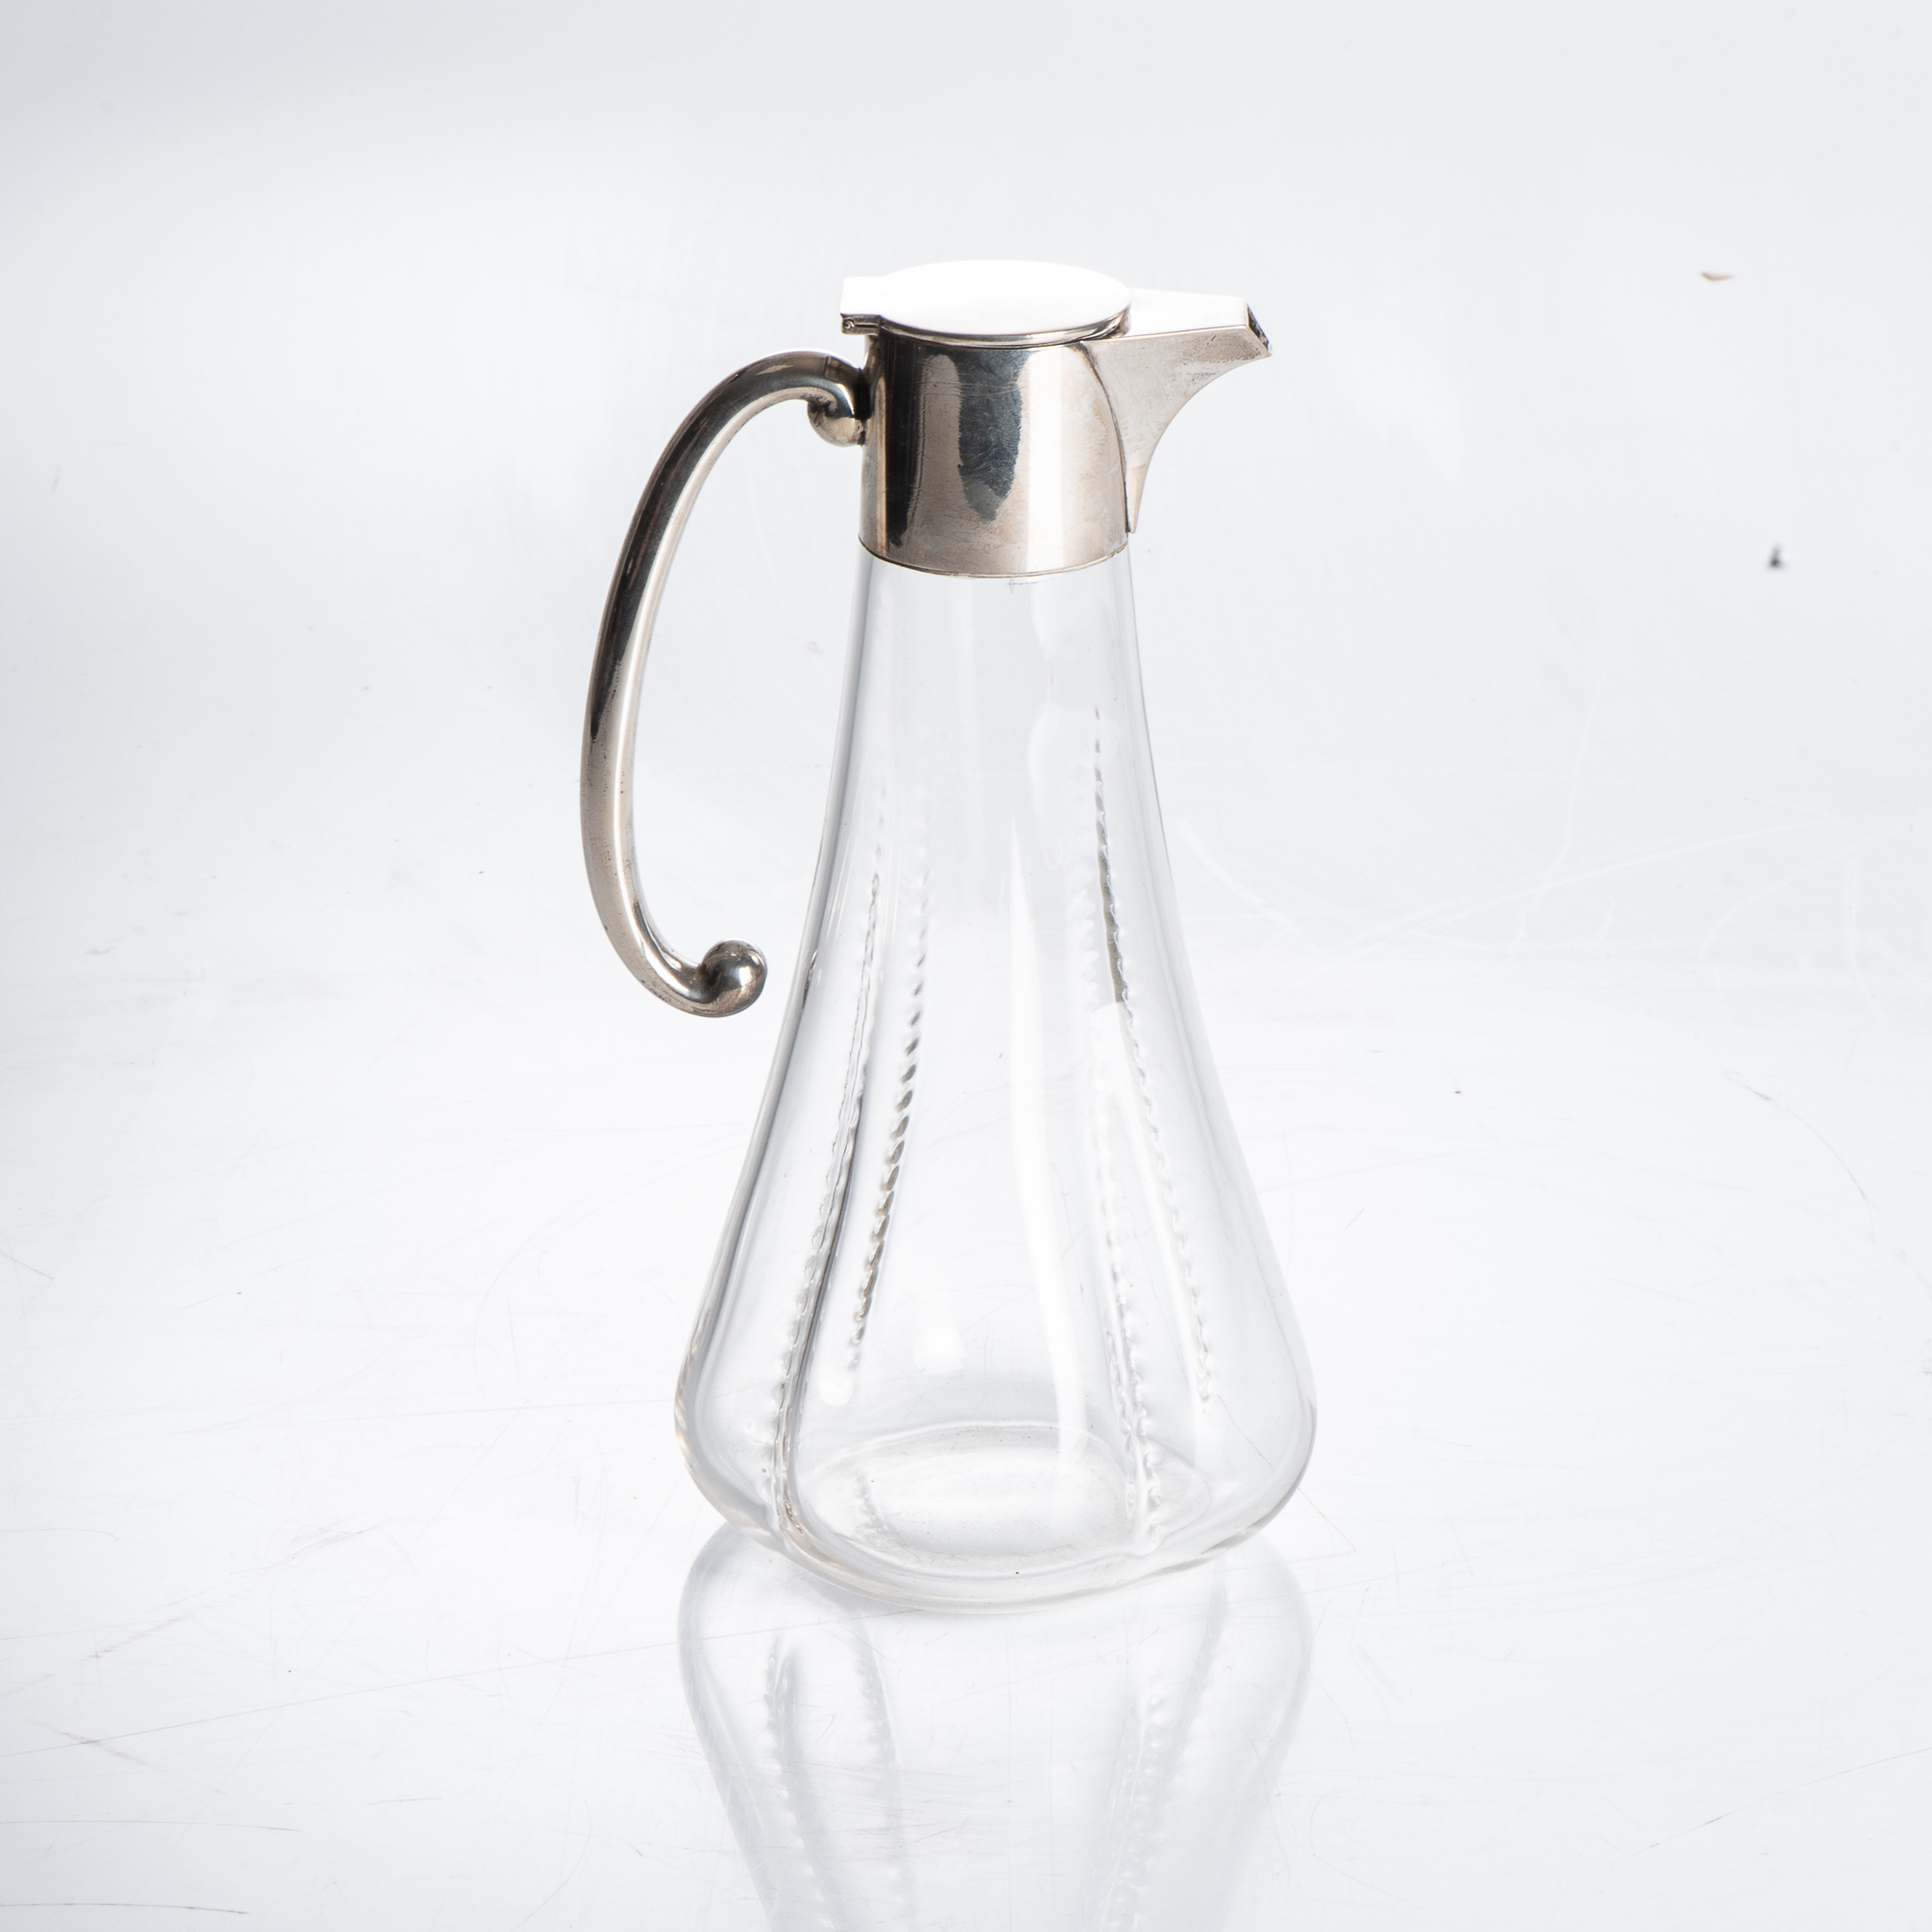 A SILVER-MOUNTED GLASS CLARET JUG